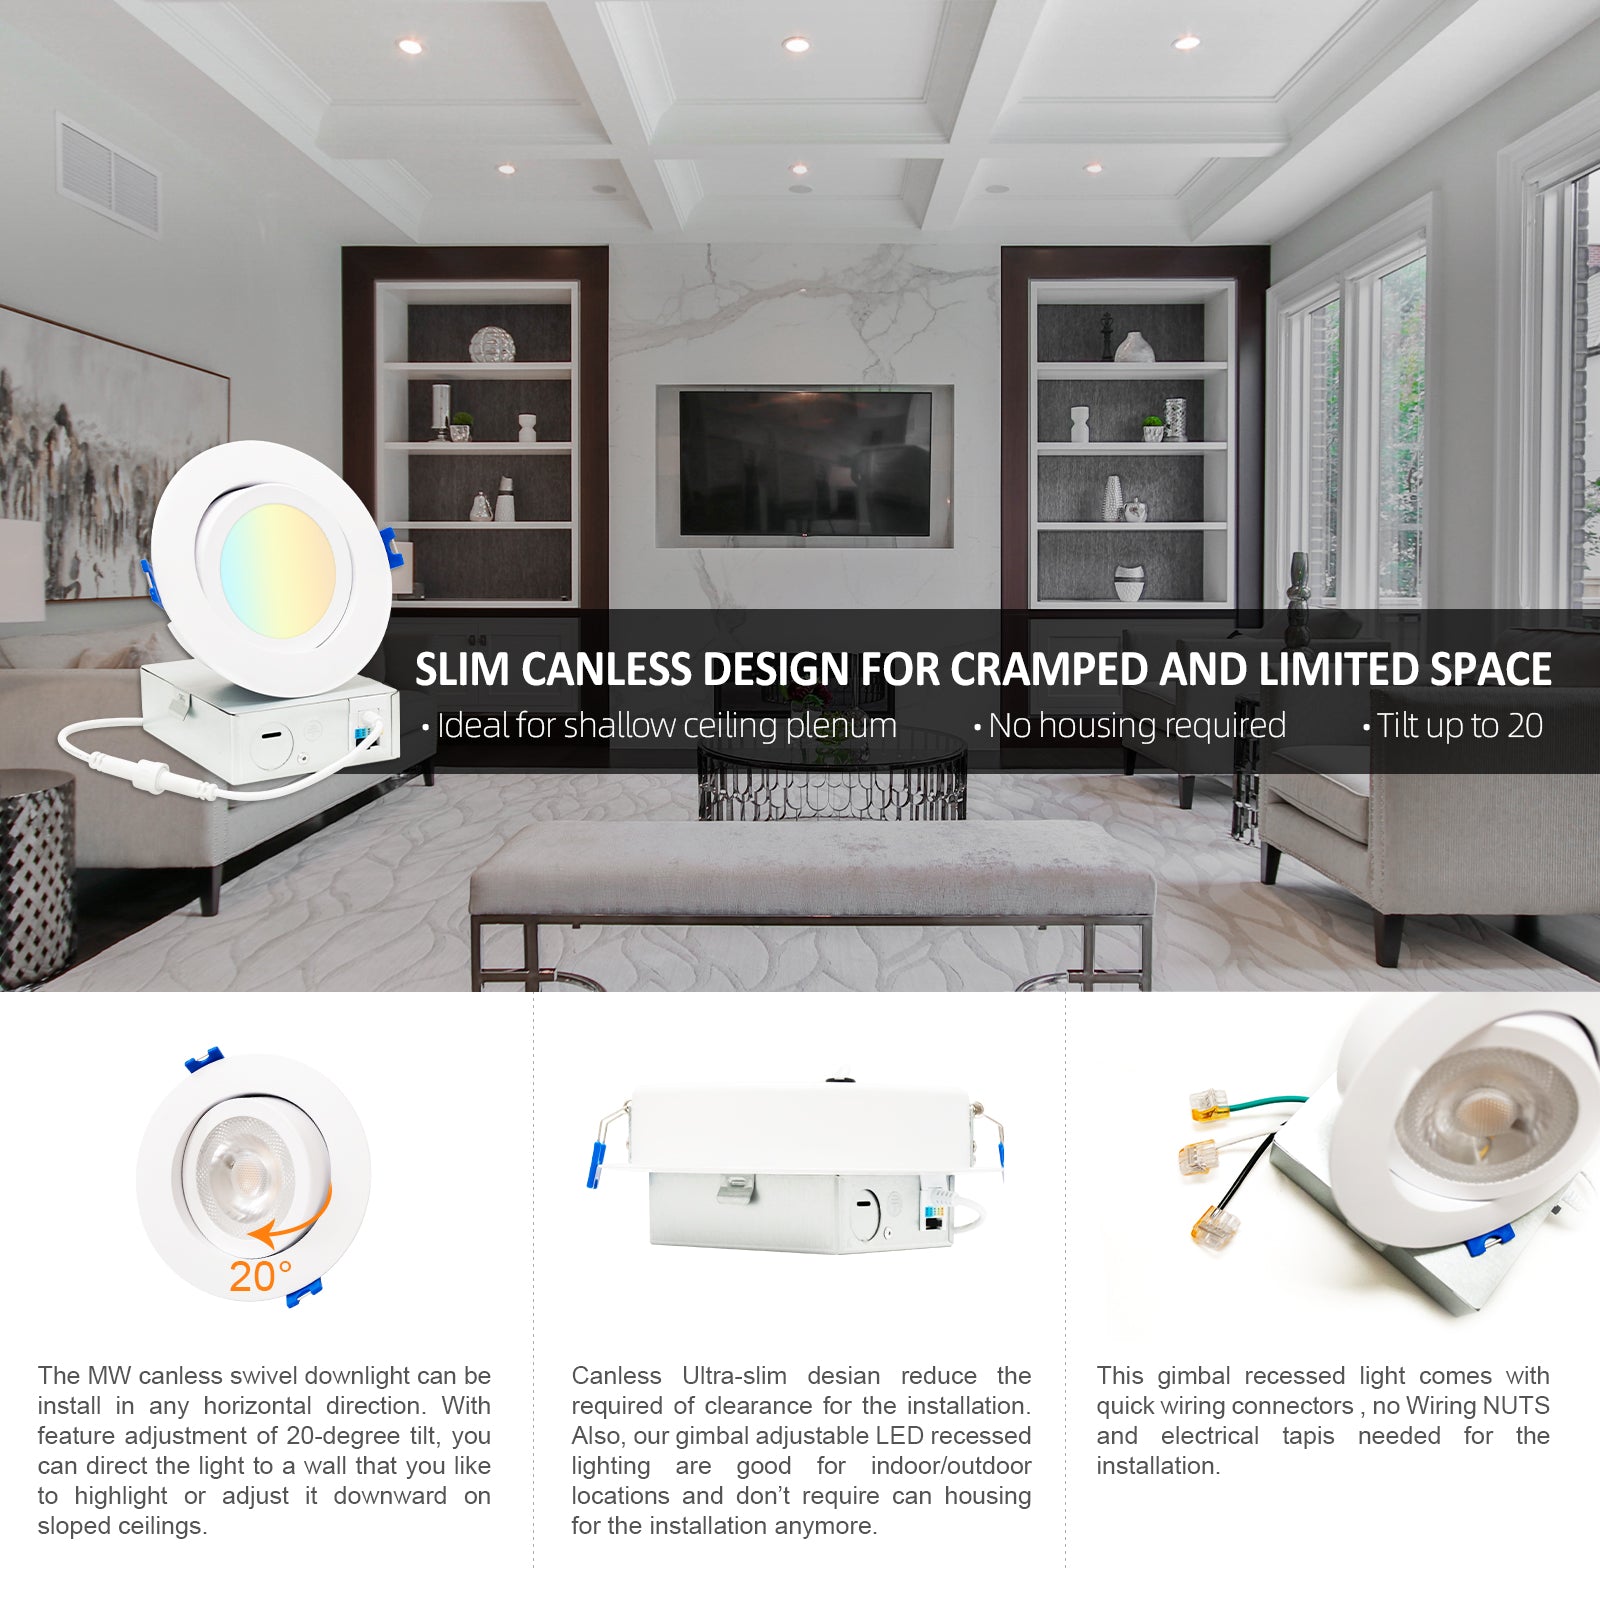 A Gimbal recessed light is a type of lighting fixture that is installed in the ceiling.